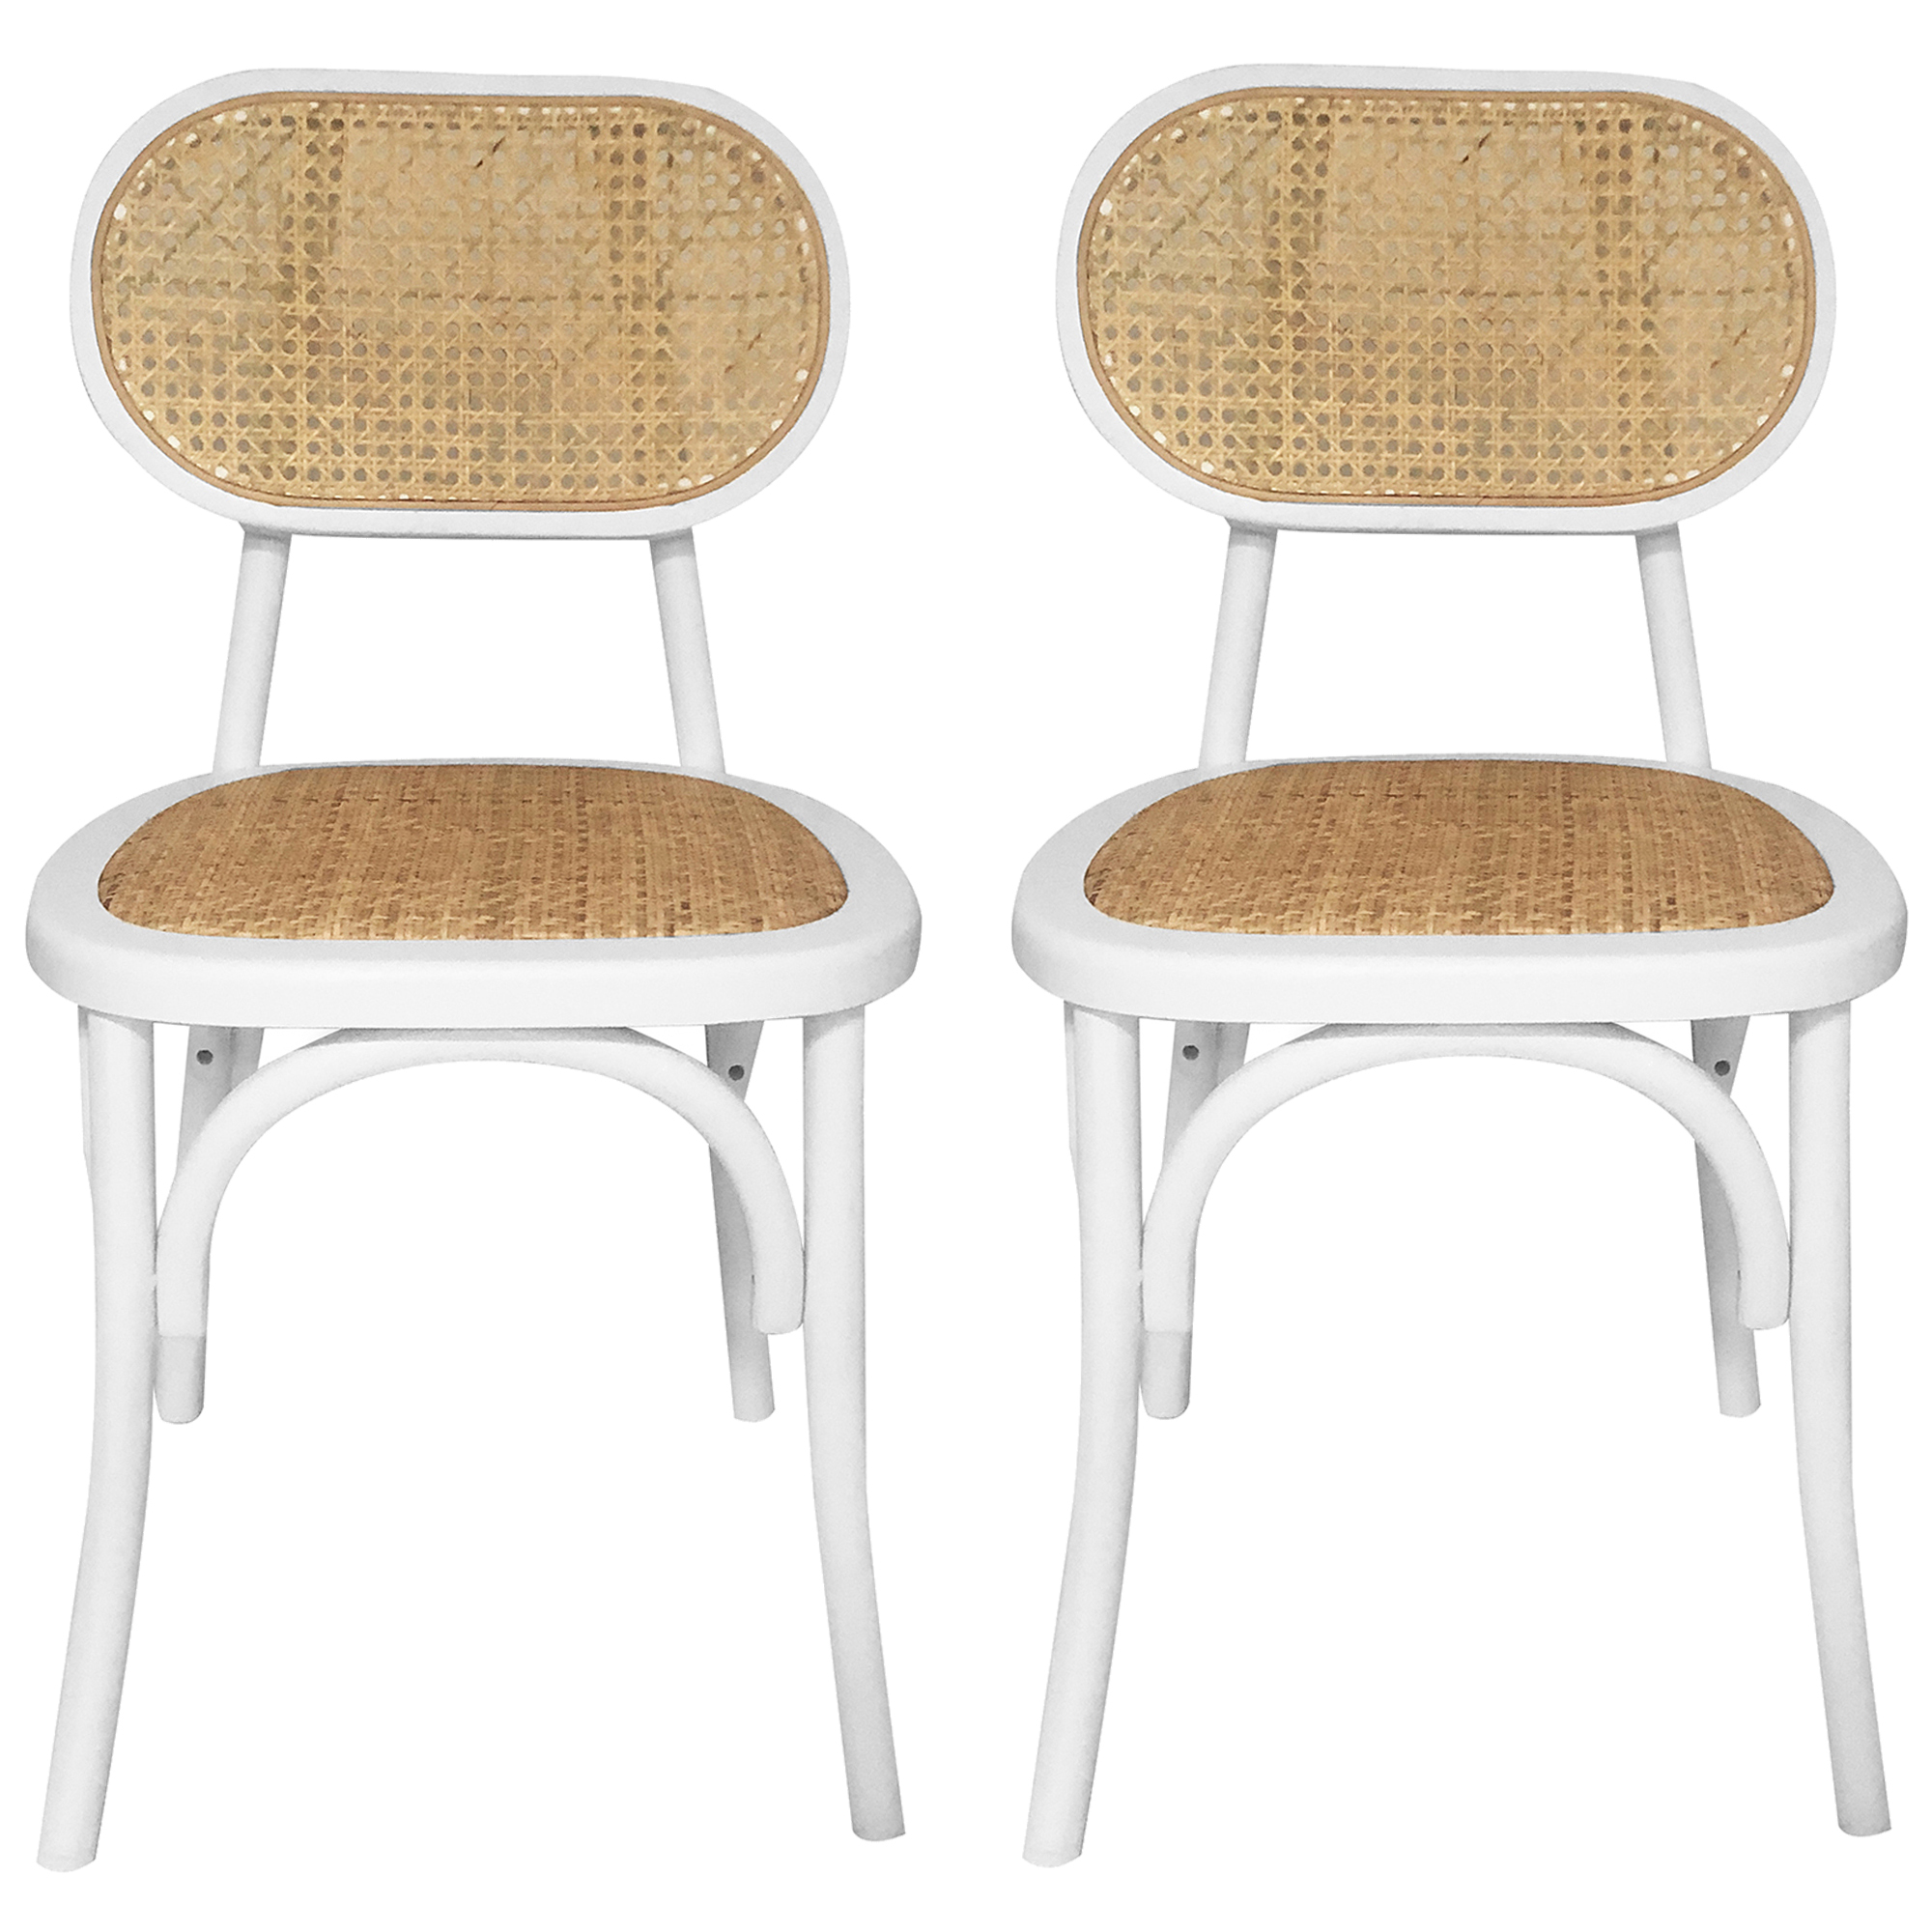 White Wicker Dining Chairs : Npd 2400029 W Kara Chippendale Style